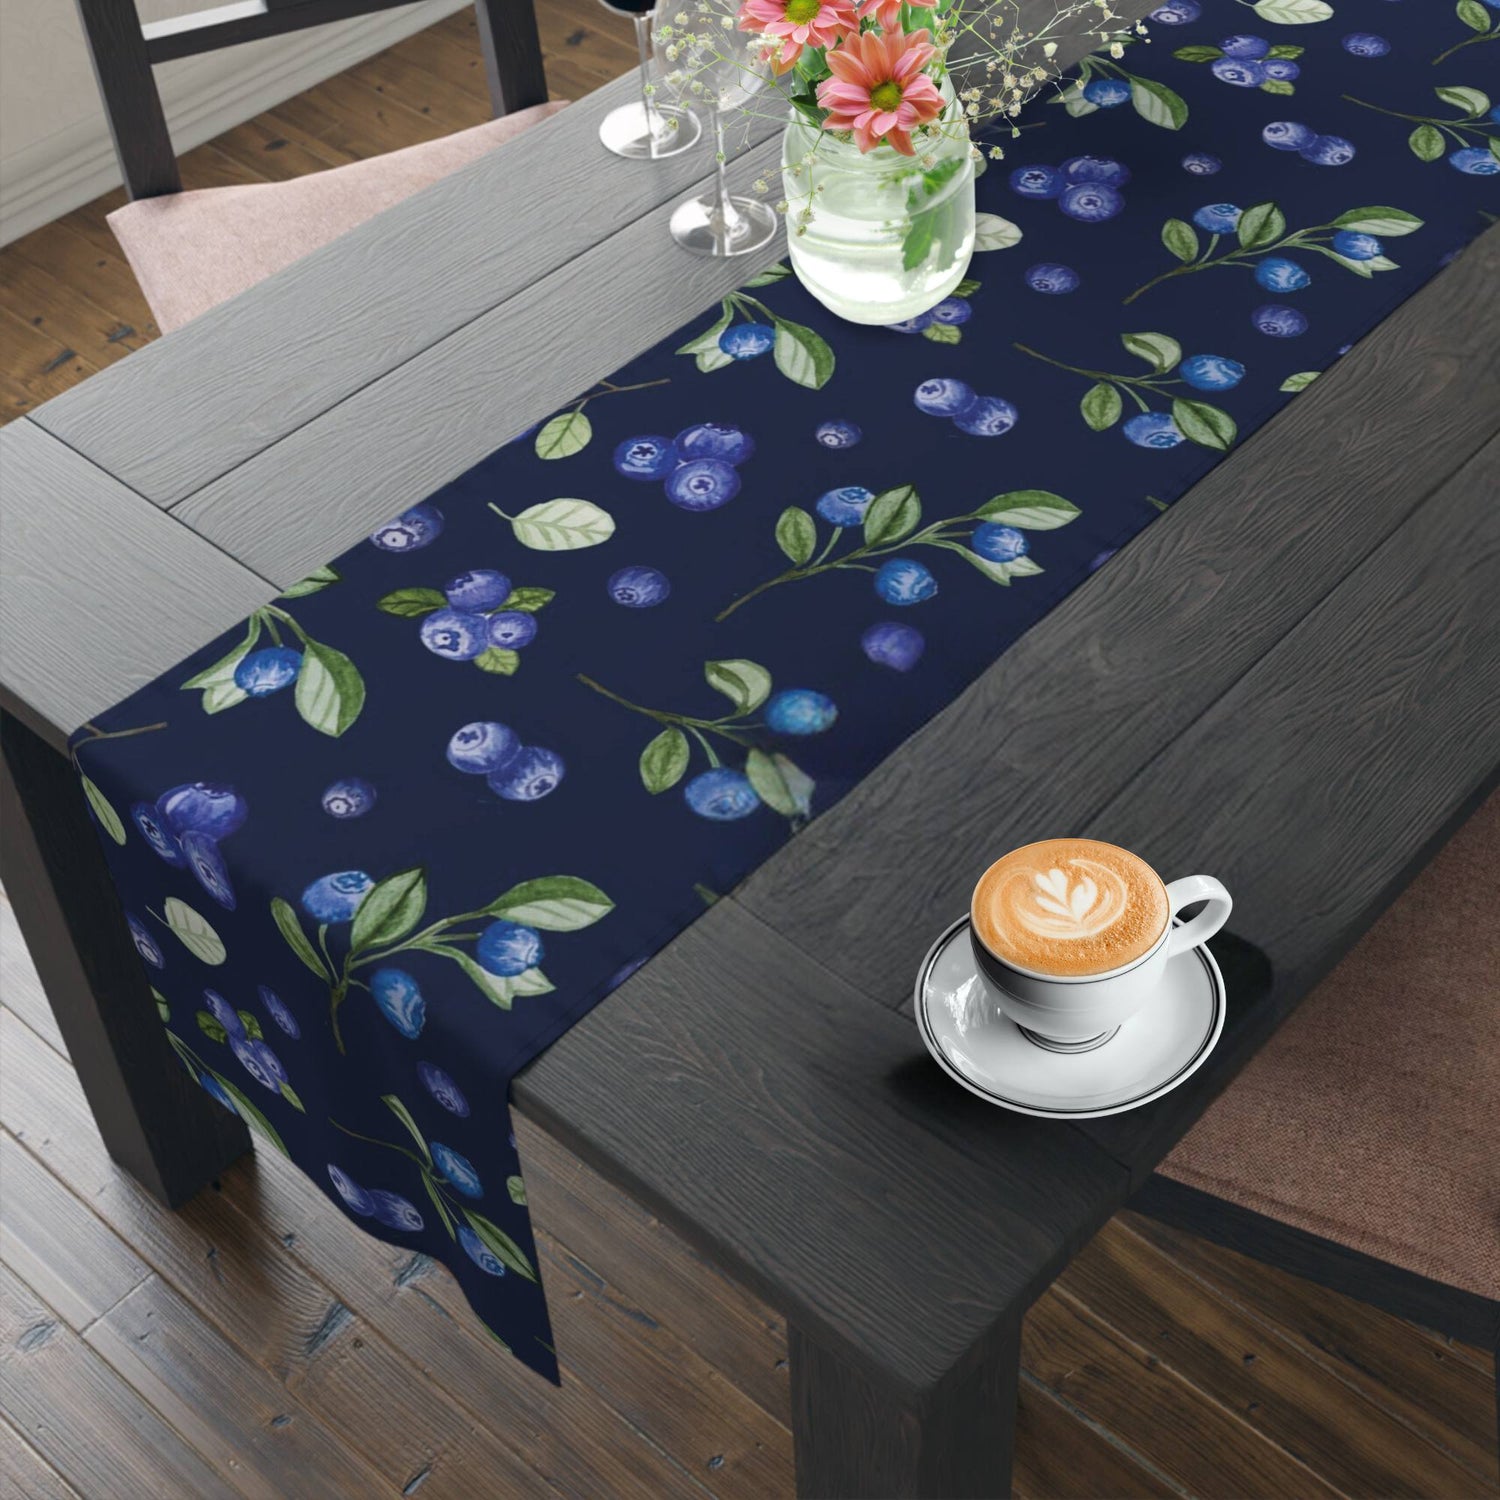 A navy blue table runner with a blueberry print runs along a dark wooden table. A white coffee cup with frothy cappuccino and a vase with pink flowers are on the table.